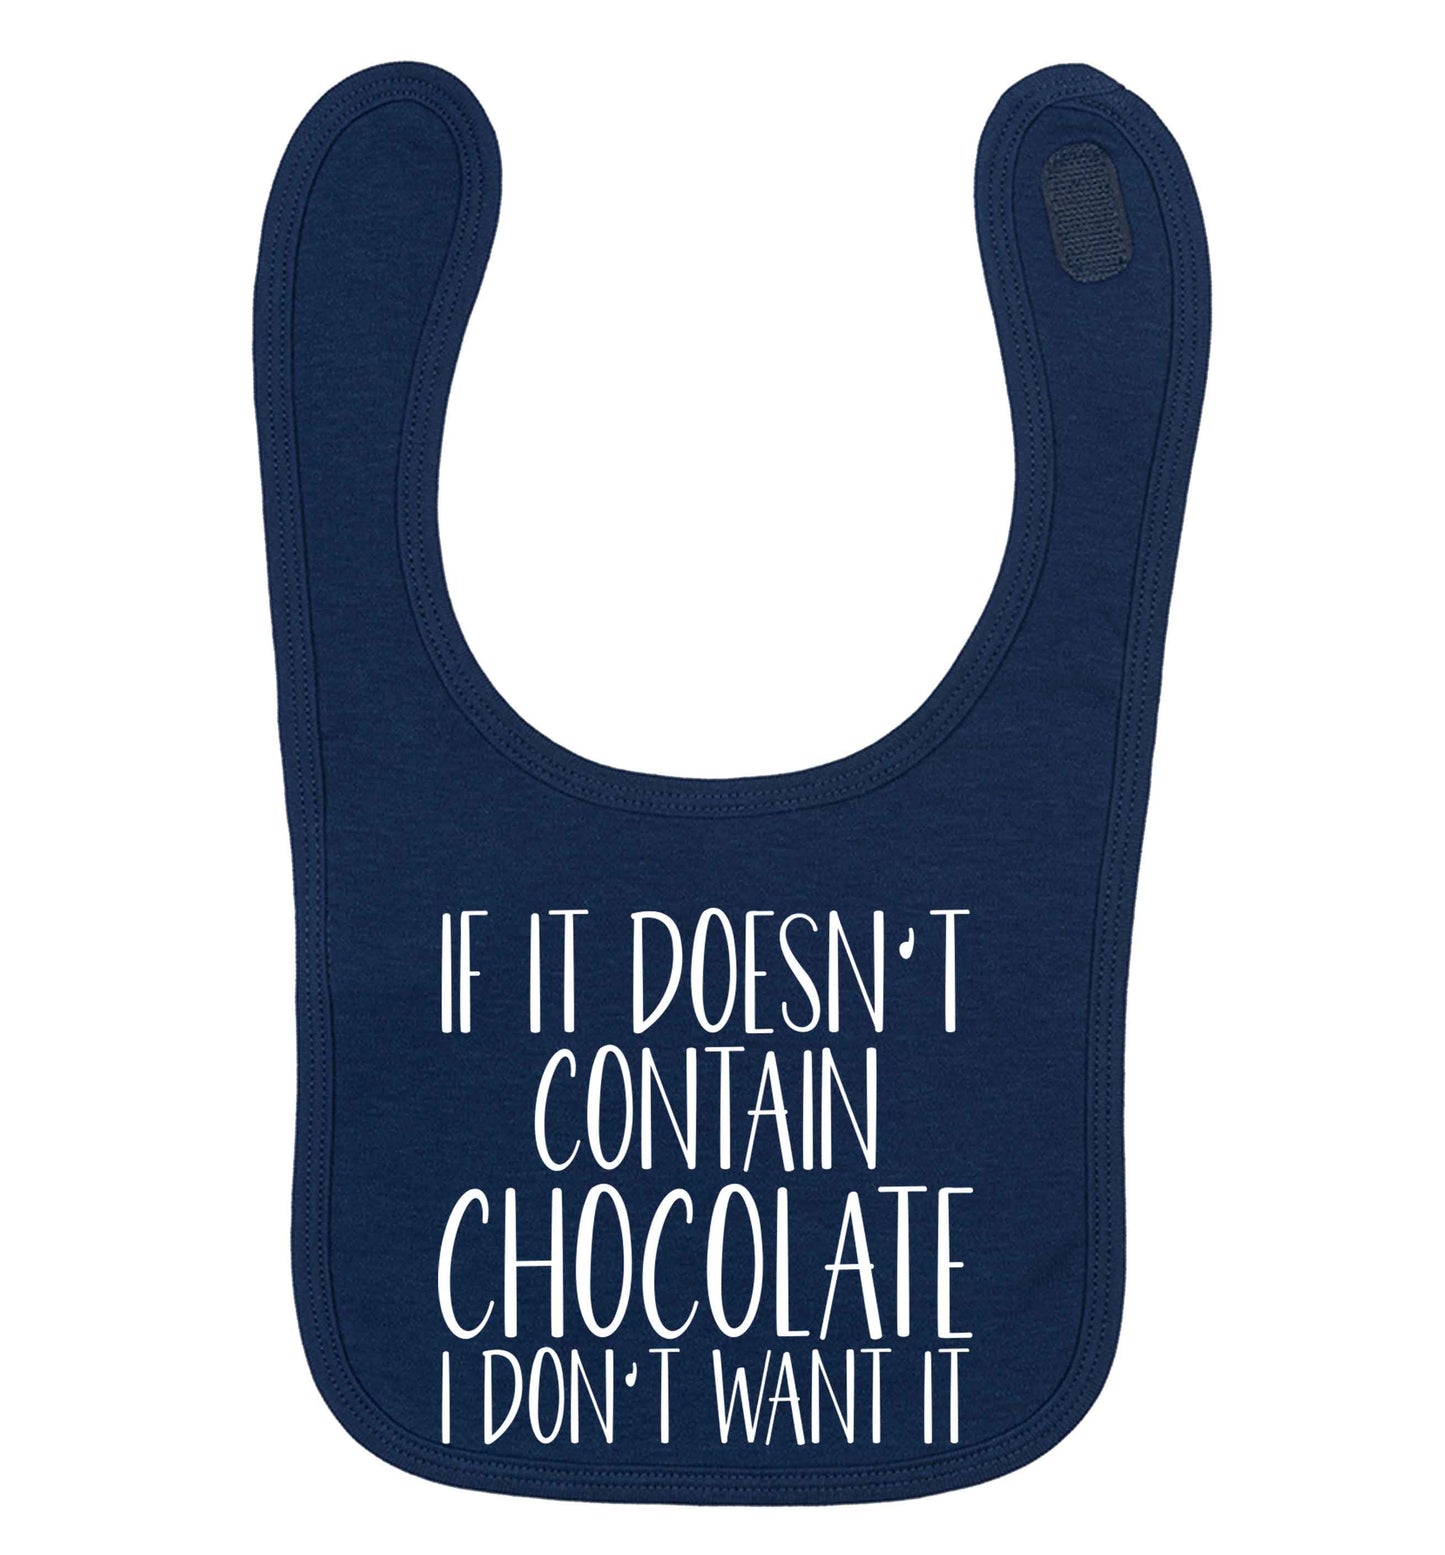 If it doesn't contain chocolate I don't want it navy baby bib